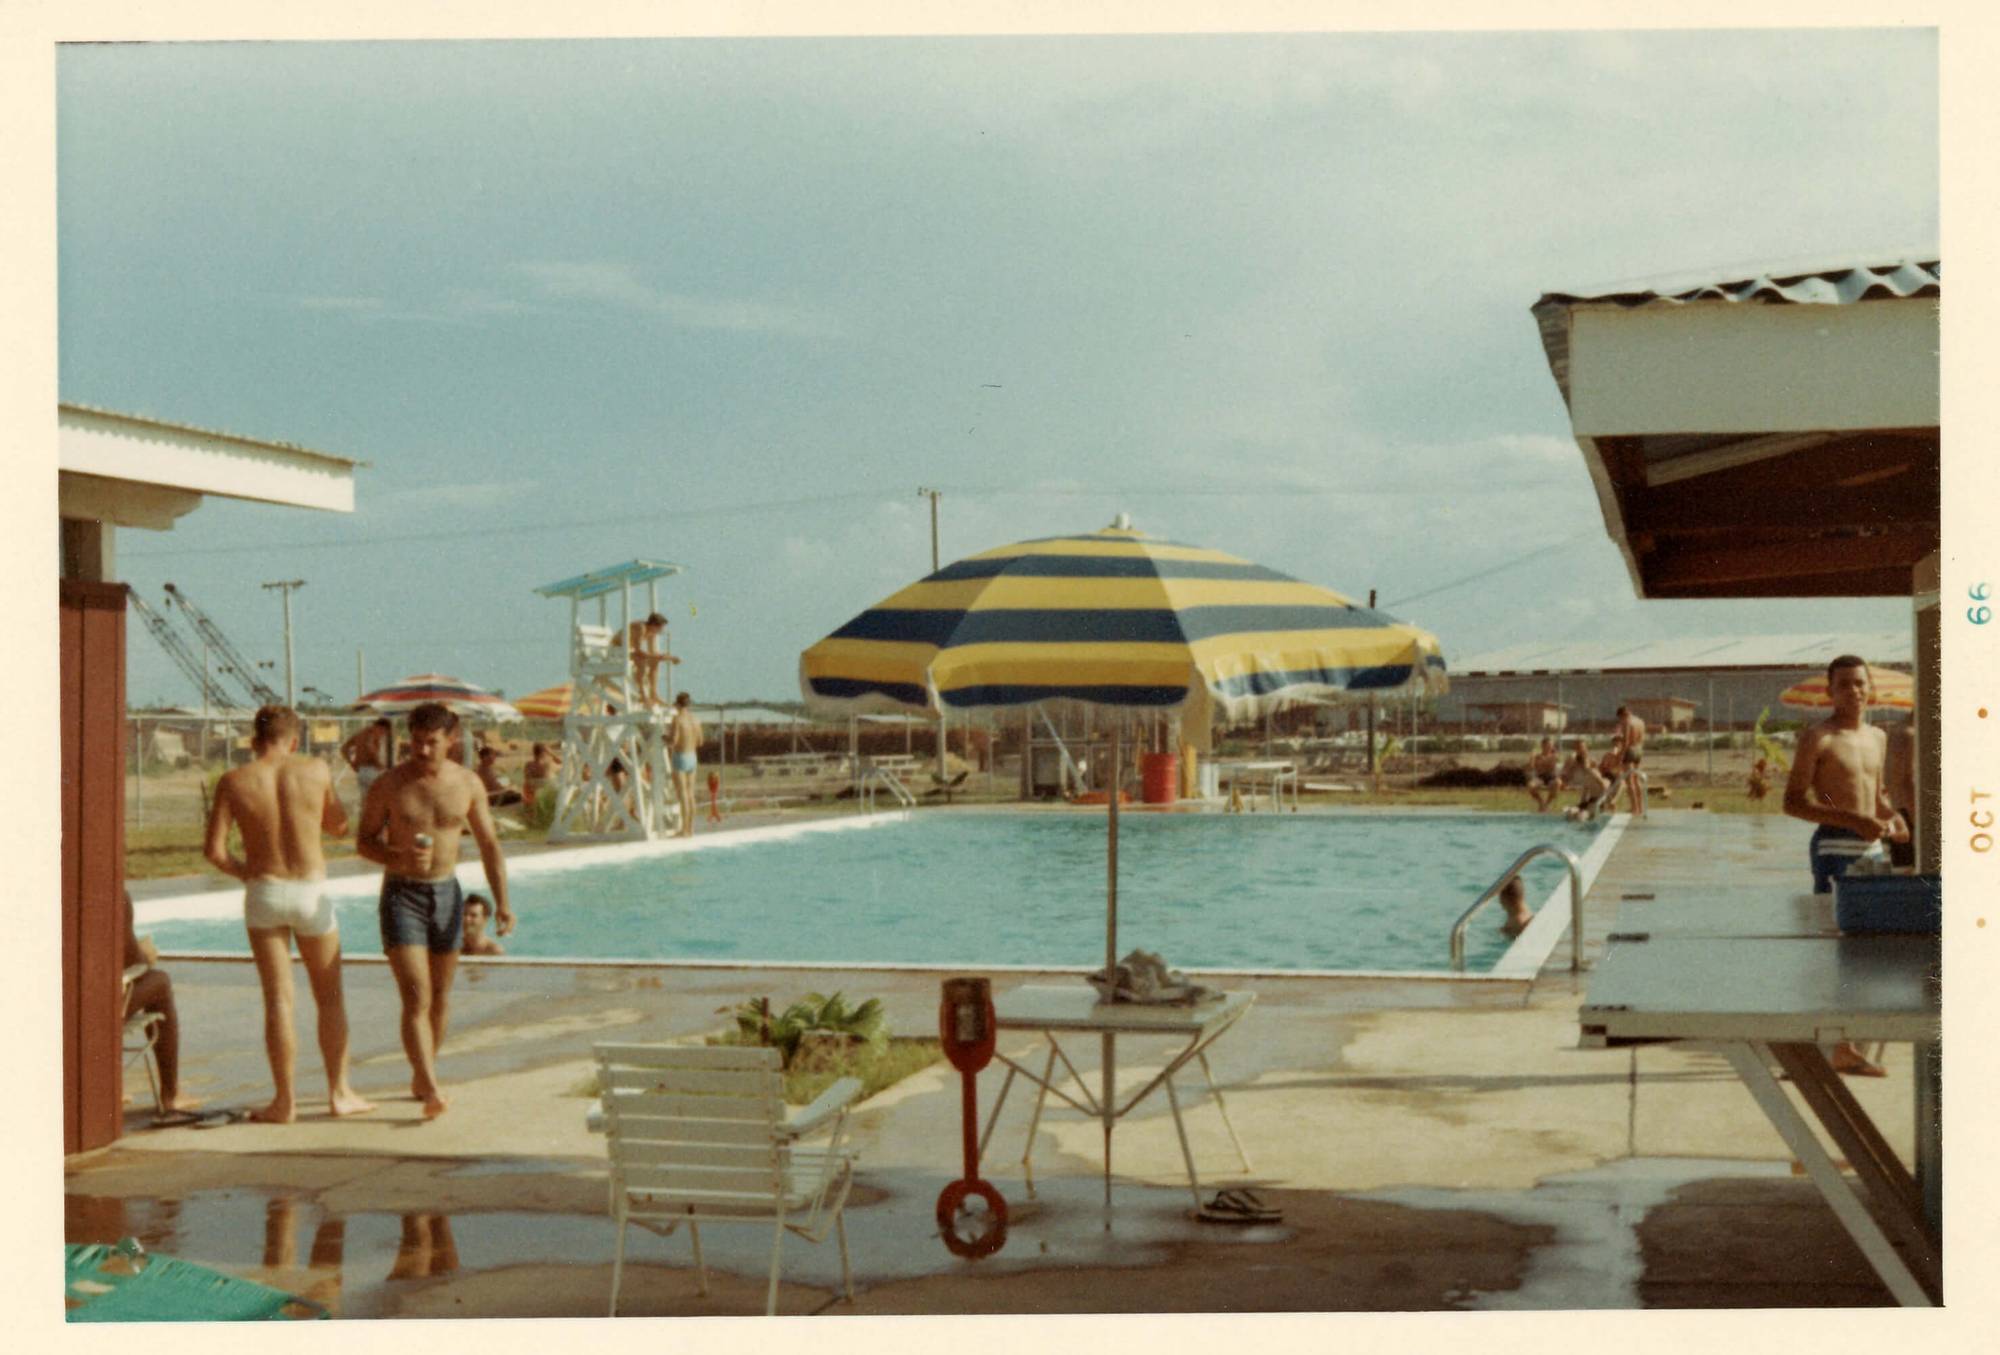 A swimming pool with a bunch of men in swimming shorts. Margins indicate the photo was taken October 1966.